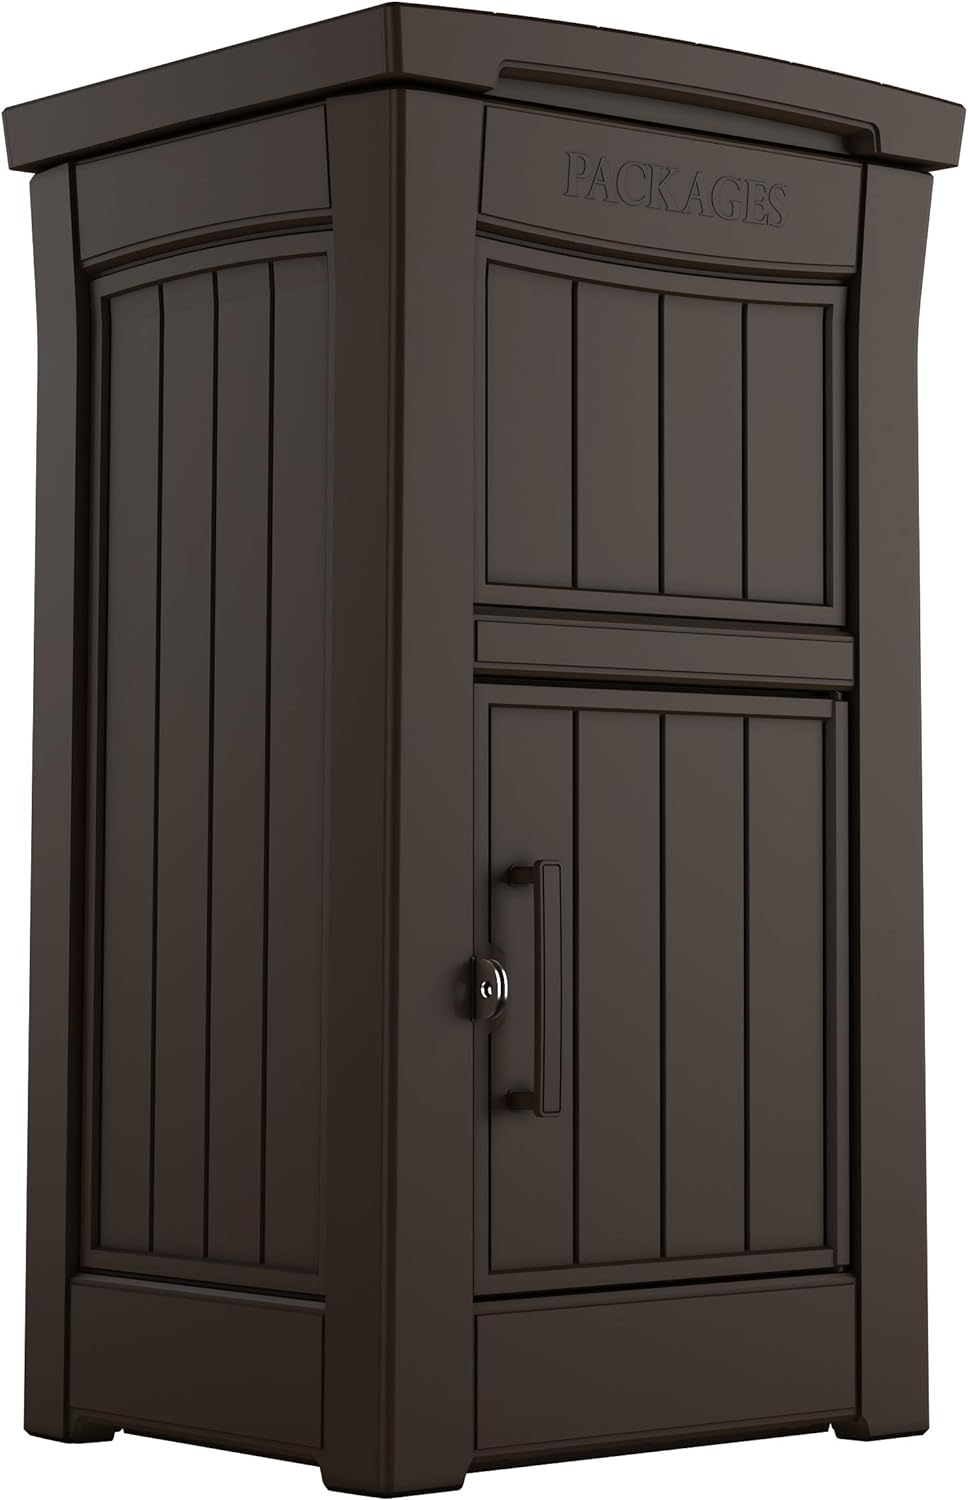 Keter Delivery Box for Porch with Lockable Secure Storage Compartment to Keep Packages Safe, One Size, Brown